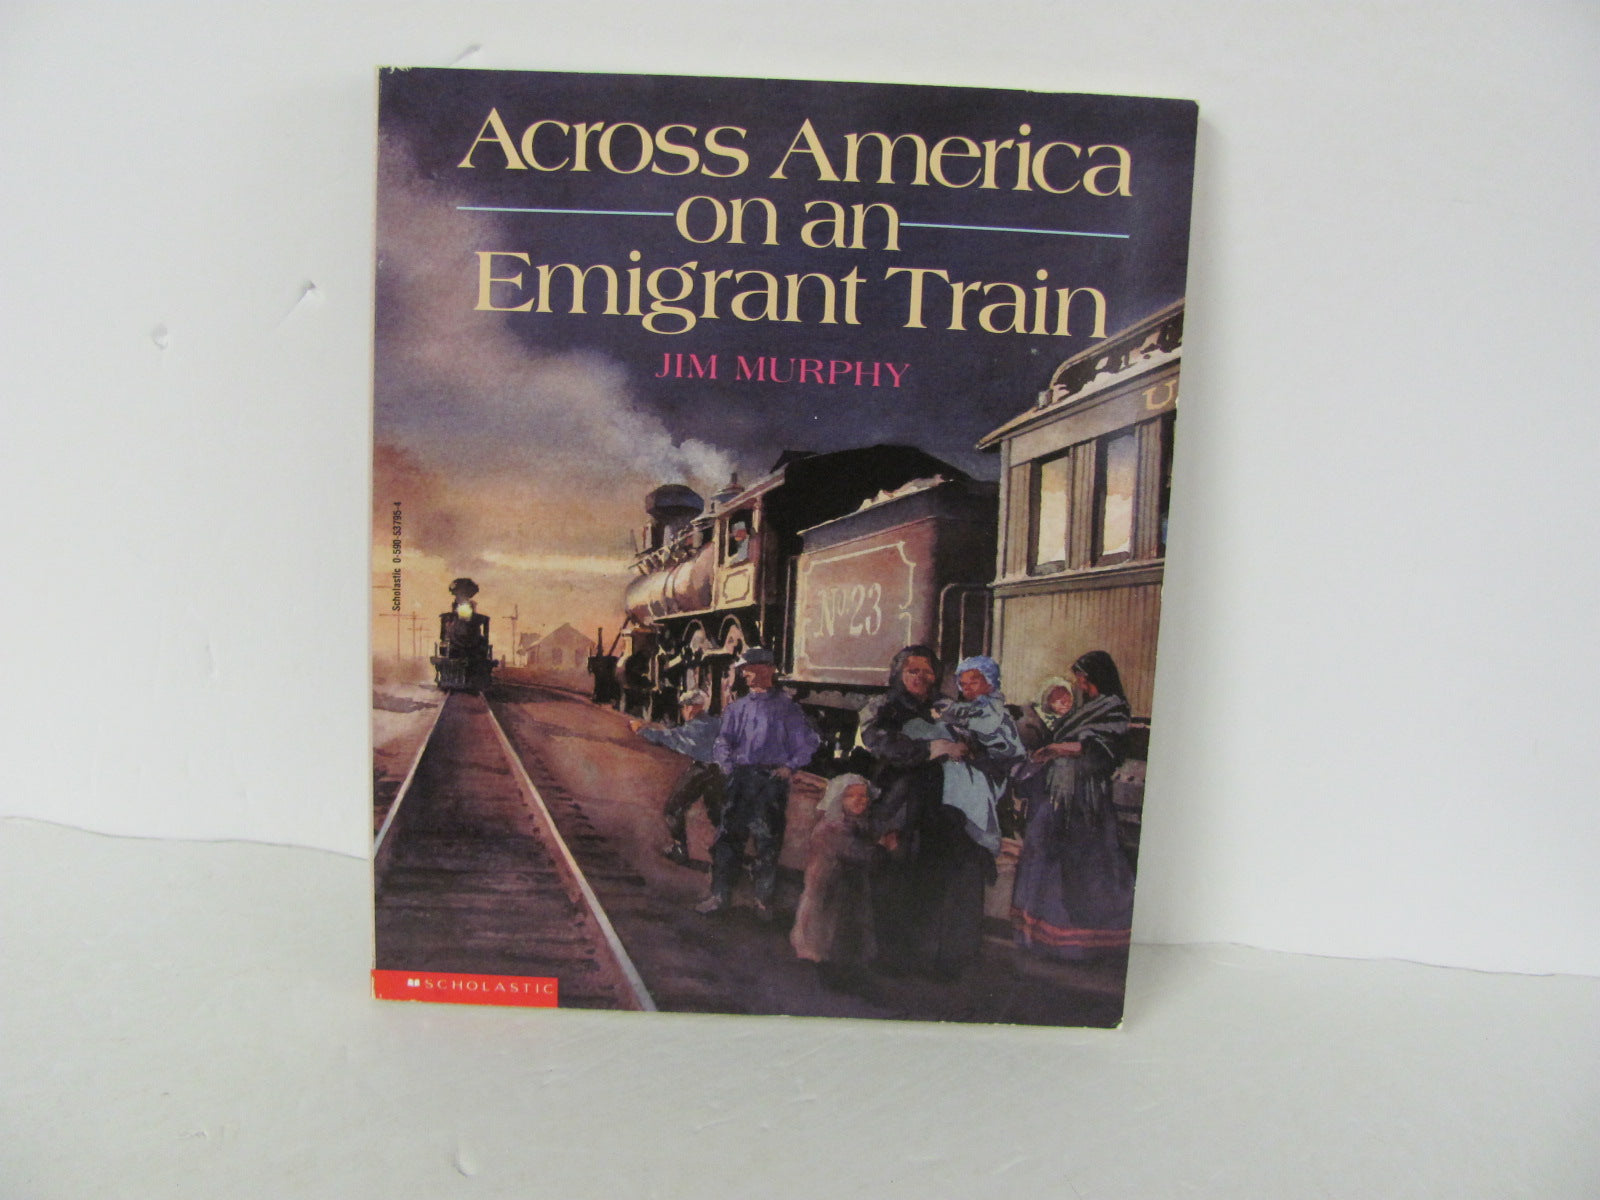 American　Emigrant　Across　an　Smart　Homeschool　Train　–　History　Scholastic　Books　Pre-Owned　Book　America　on